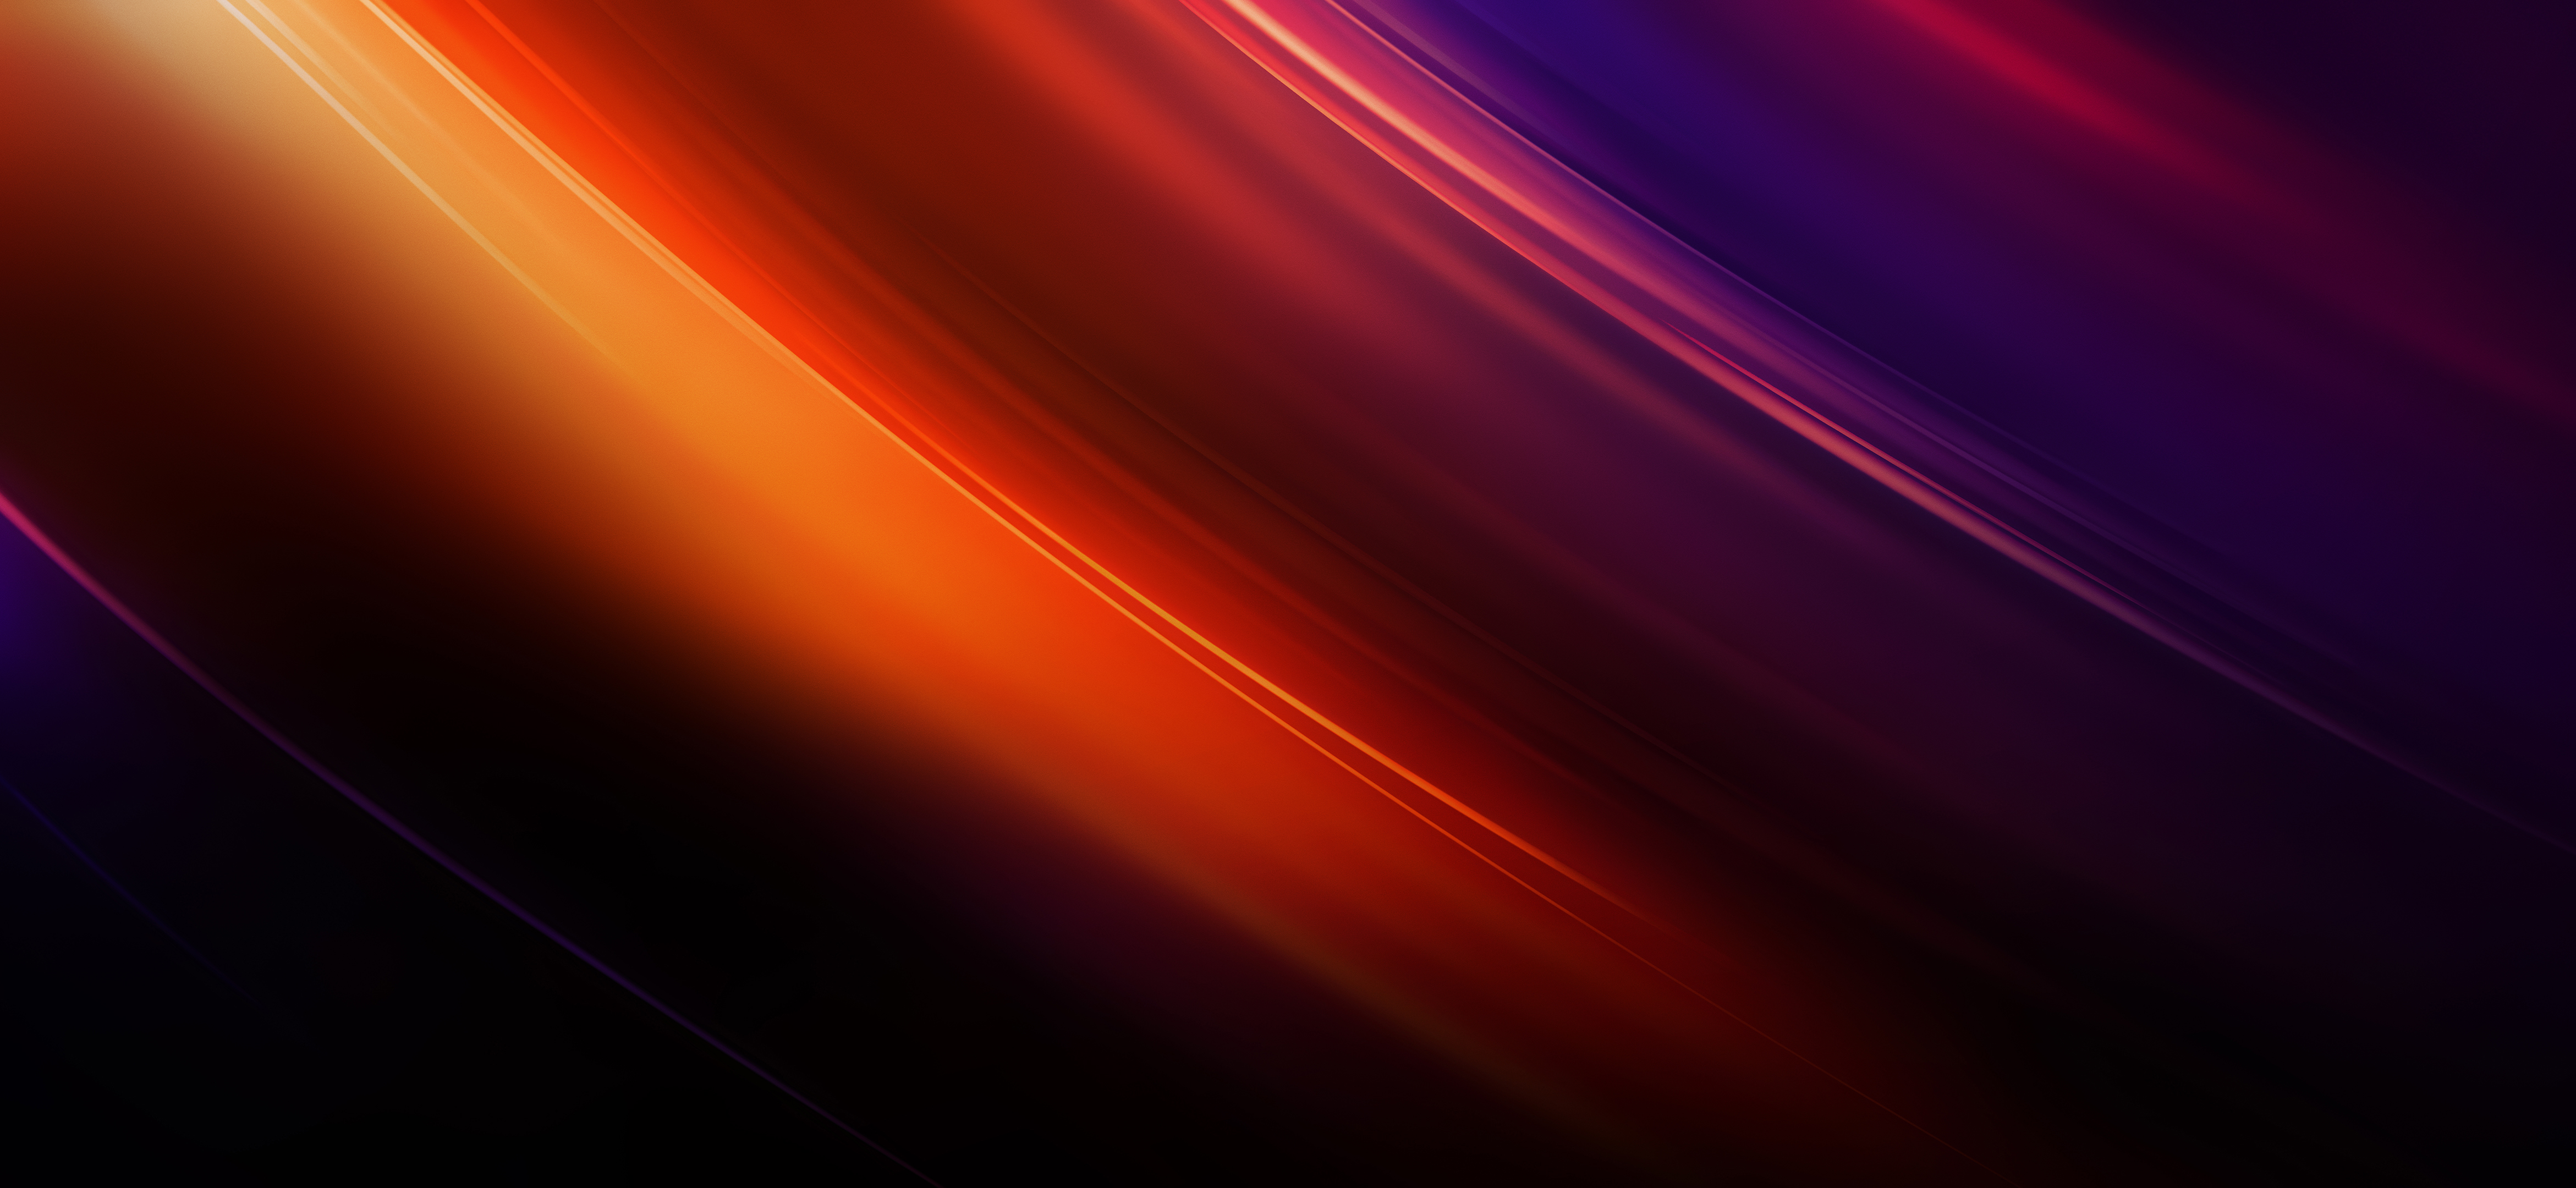 OnePlus 8 Pro Wallpaper 4K, Stock, 2020, Abstract, #512